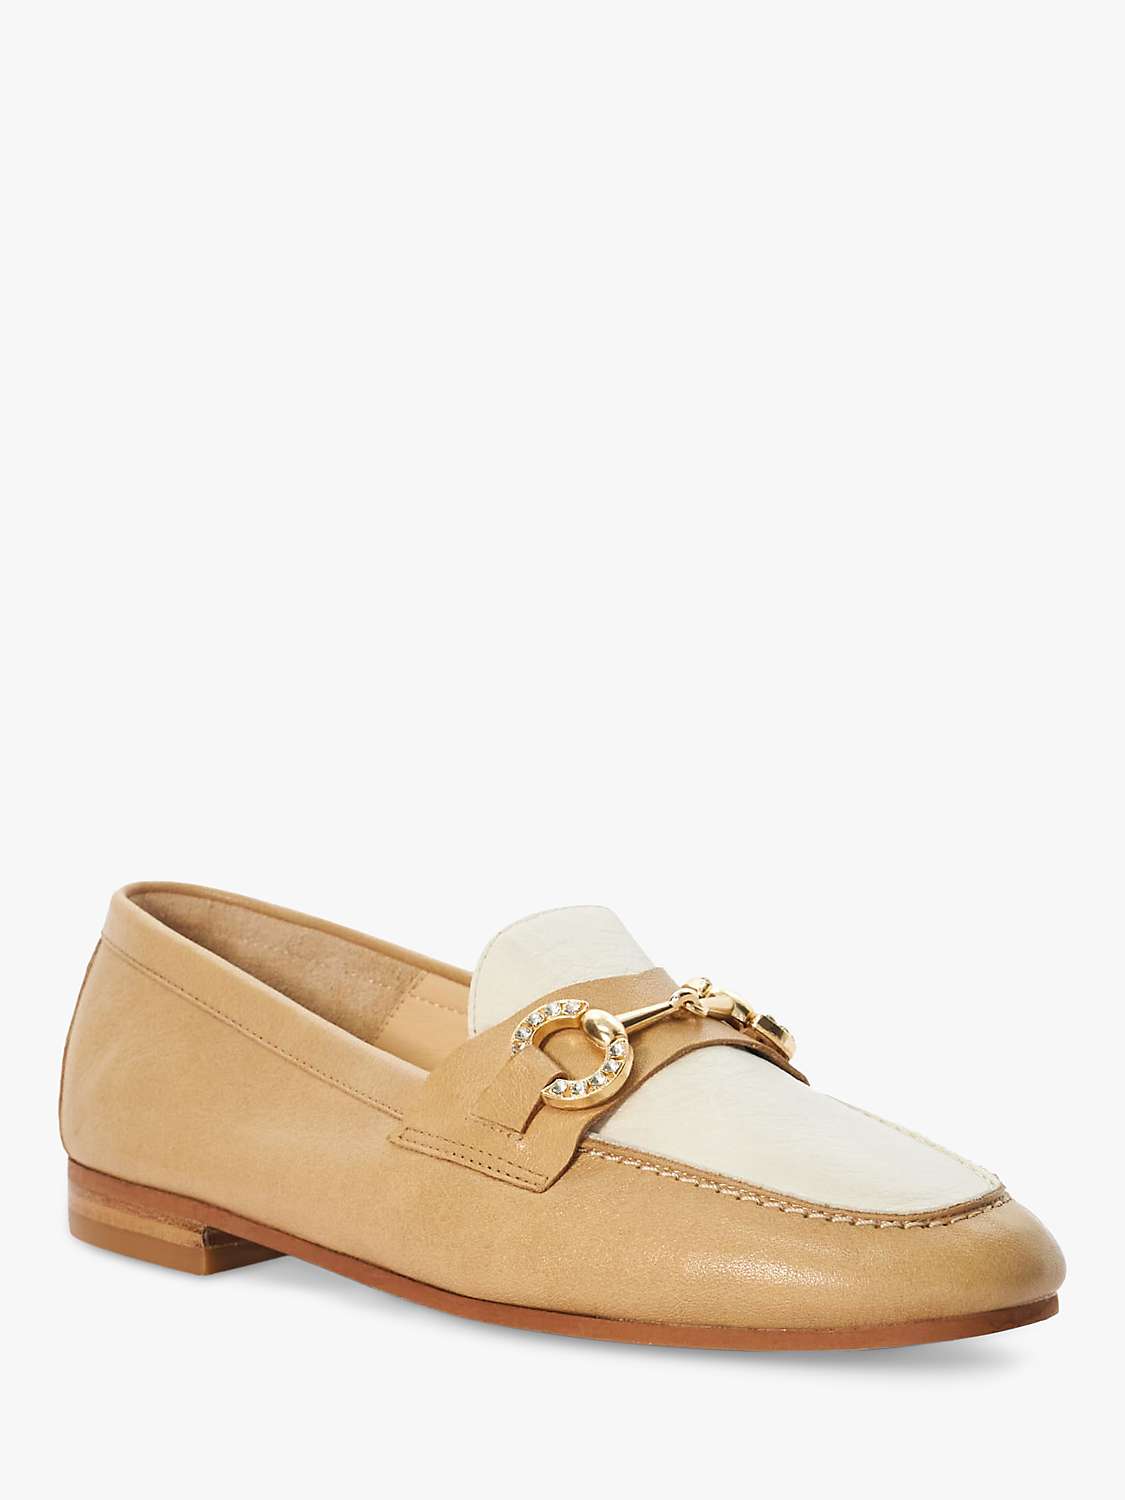 Buy Dune Gemstone Detail Leather Loafers Online at johnlewis.com